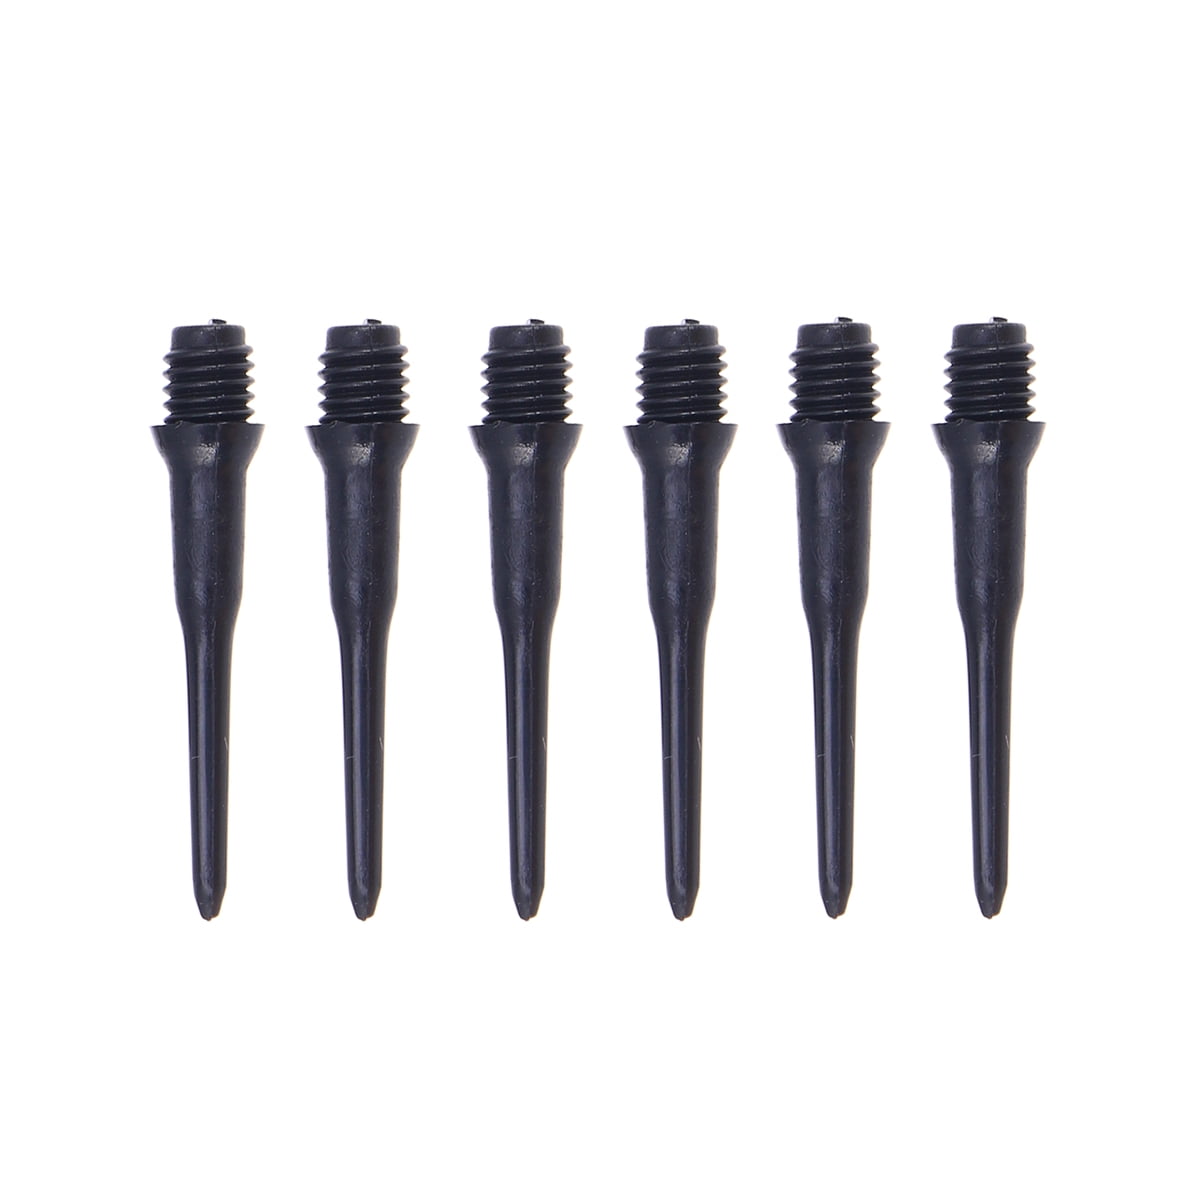 DARTS SOFT TIPS PACK OF 50 KEY POINT REPLACEMENT POINTS SPECIAL OFFER B1F8 N2F9 